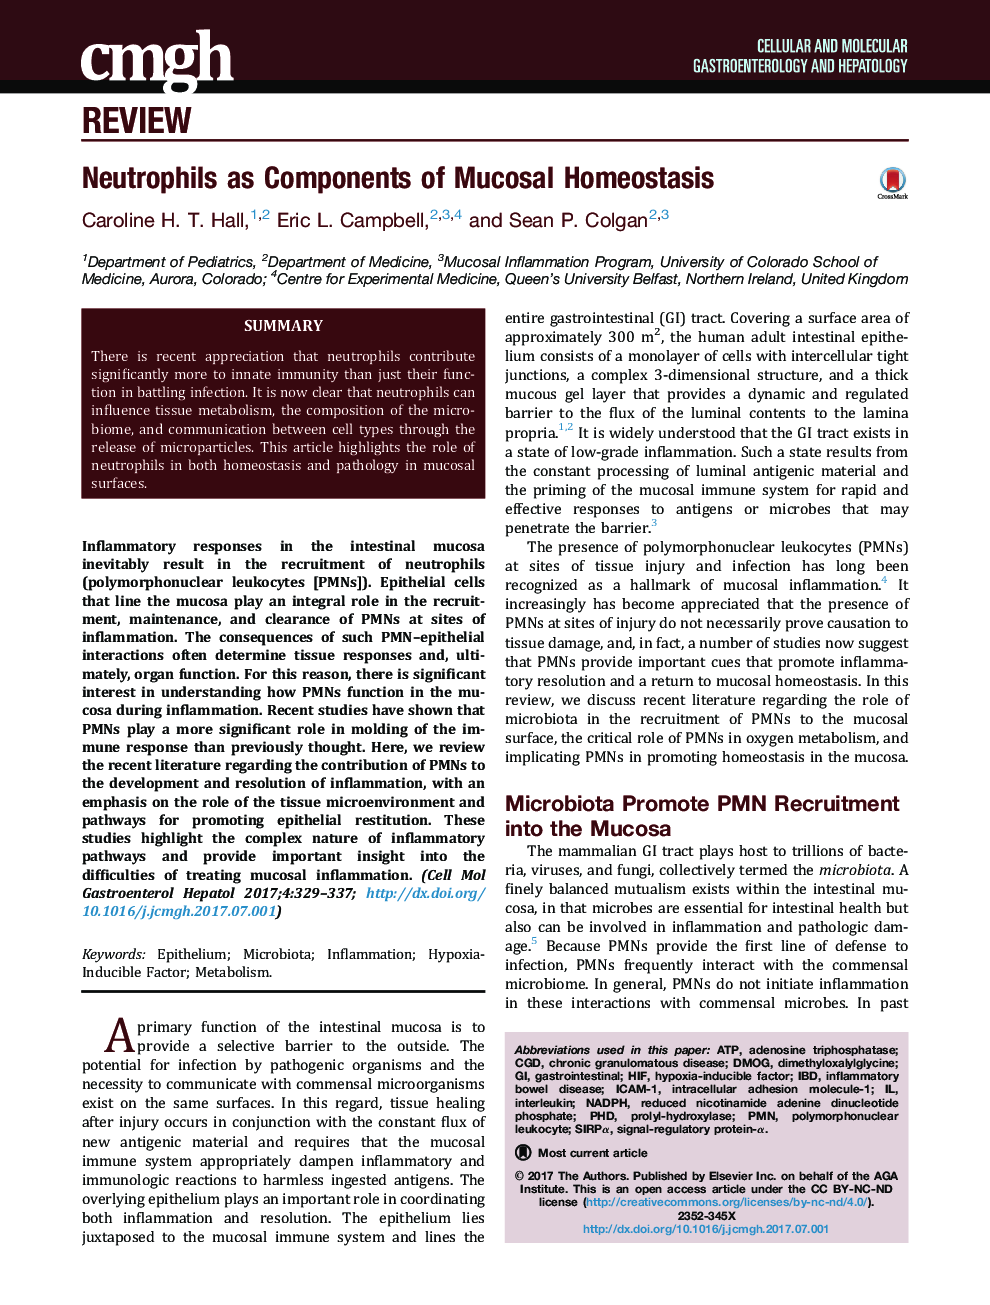 Neutrophils as Components of Mucosal Homeostasis